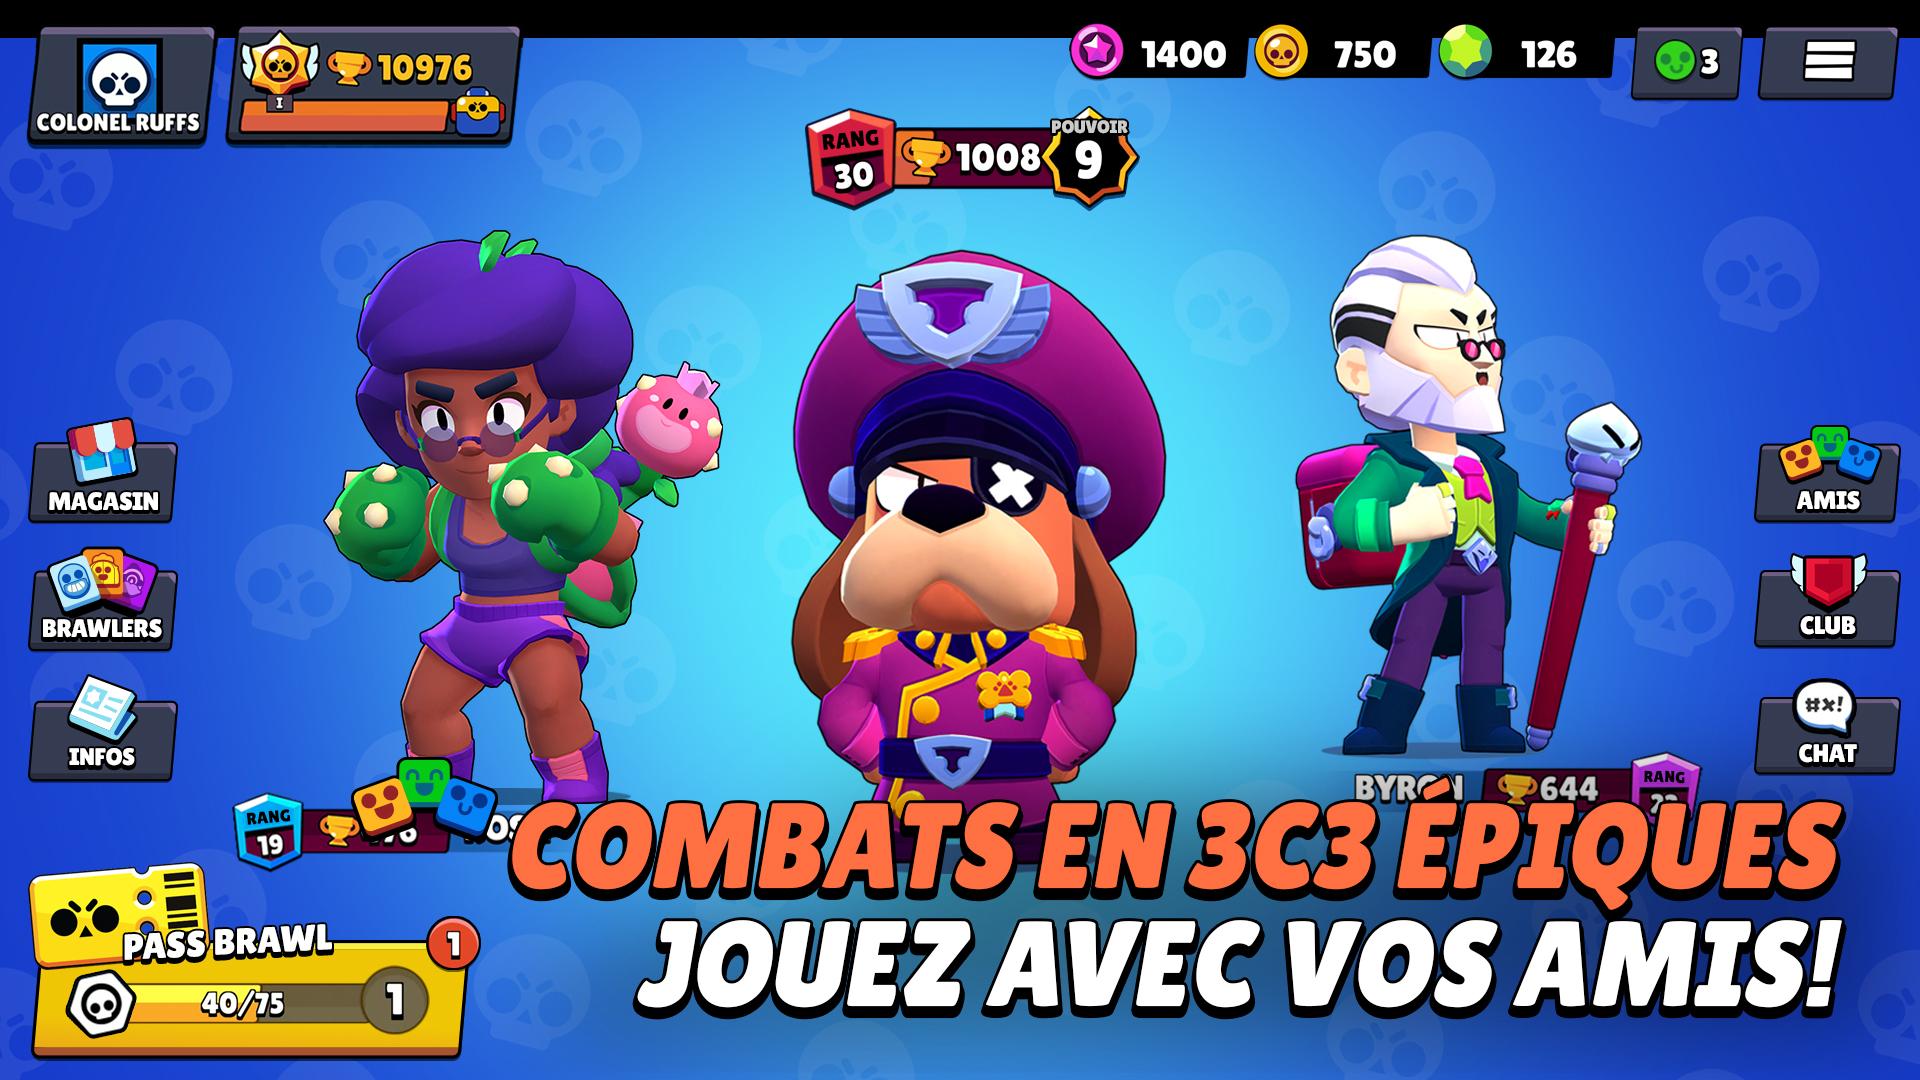 Brawl Stars Apk Download Pick Up Your Hero Characters In 3v3 Smash And Grab Mode Brock Shelly Jessie And Barley - brawl stars mise a jour brawleur